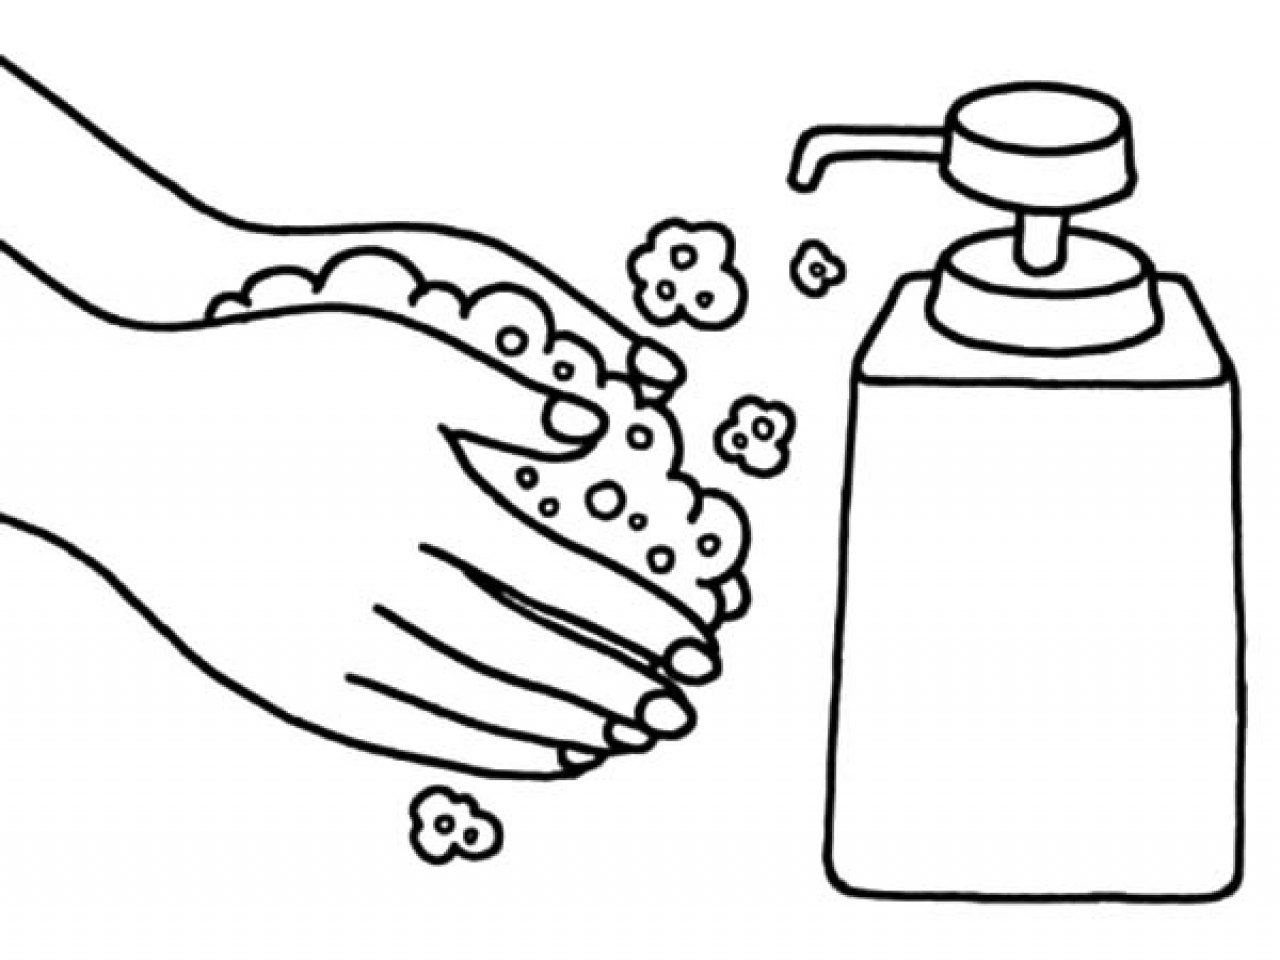 Download Wash Hands Coloring Pages - Coloring Home